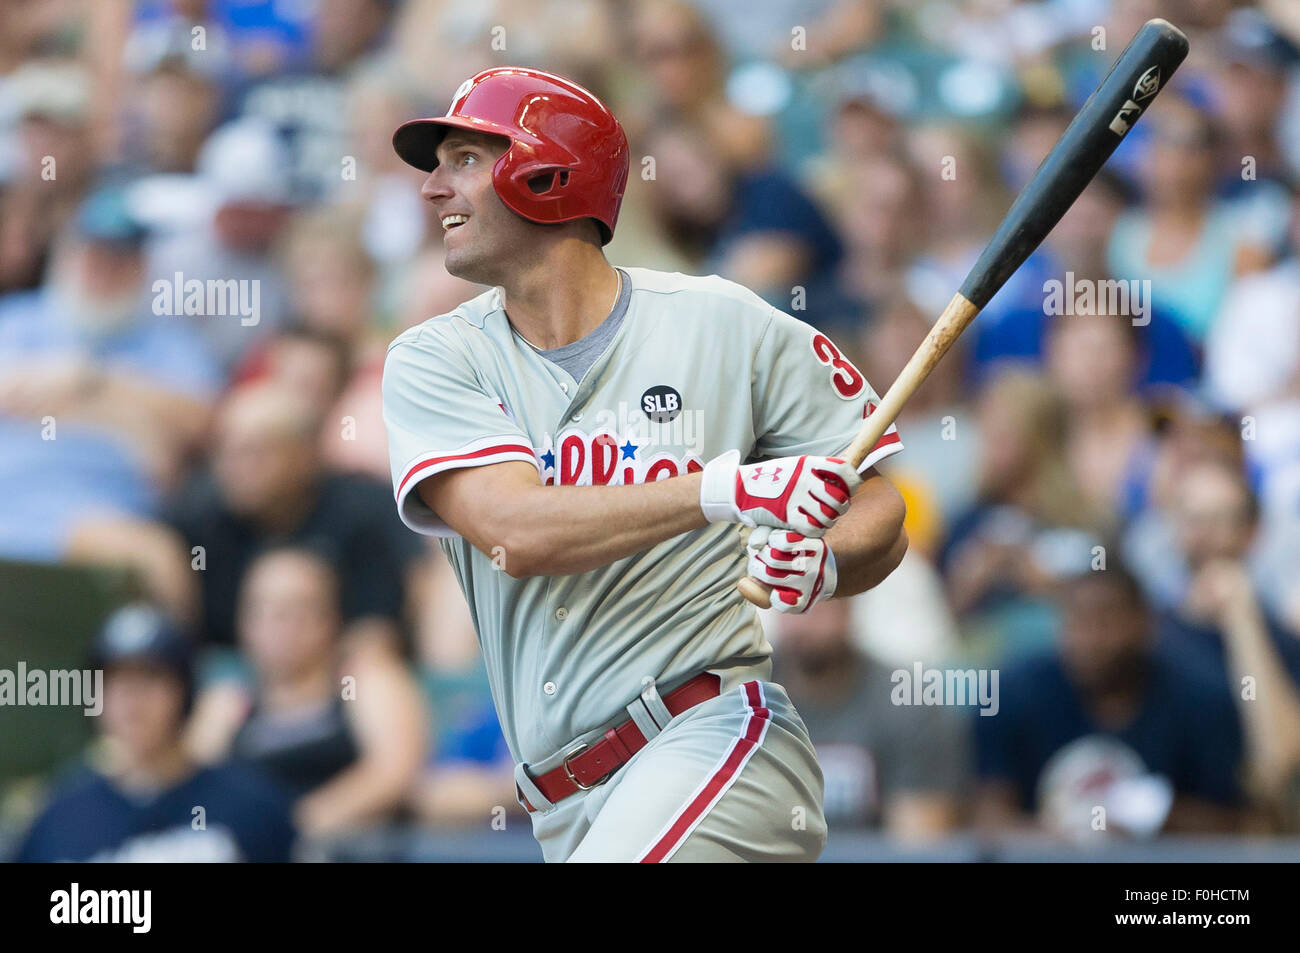 Milwaukee, WI, USA. 15th Aug, 2015. Philadelphia Phillies right fielder Jeff Francoeur #3 during game action in the Major League Baseball game between the Milwaukee Brewers and the Philadelphia Phillies at Miller Park in Milwaukee, WI. John Fisher/CSM/Alamy Live News Stock Photo